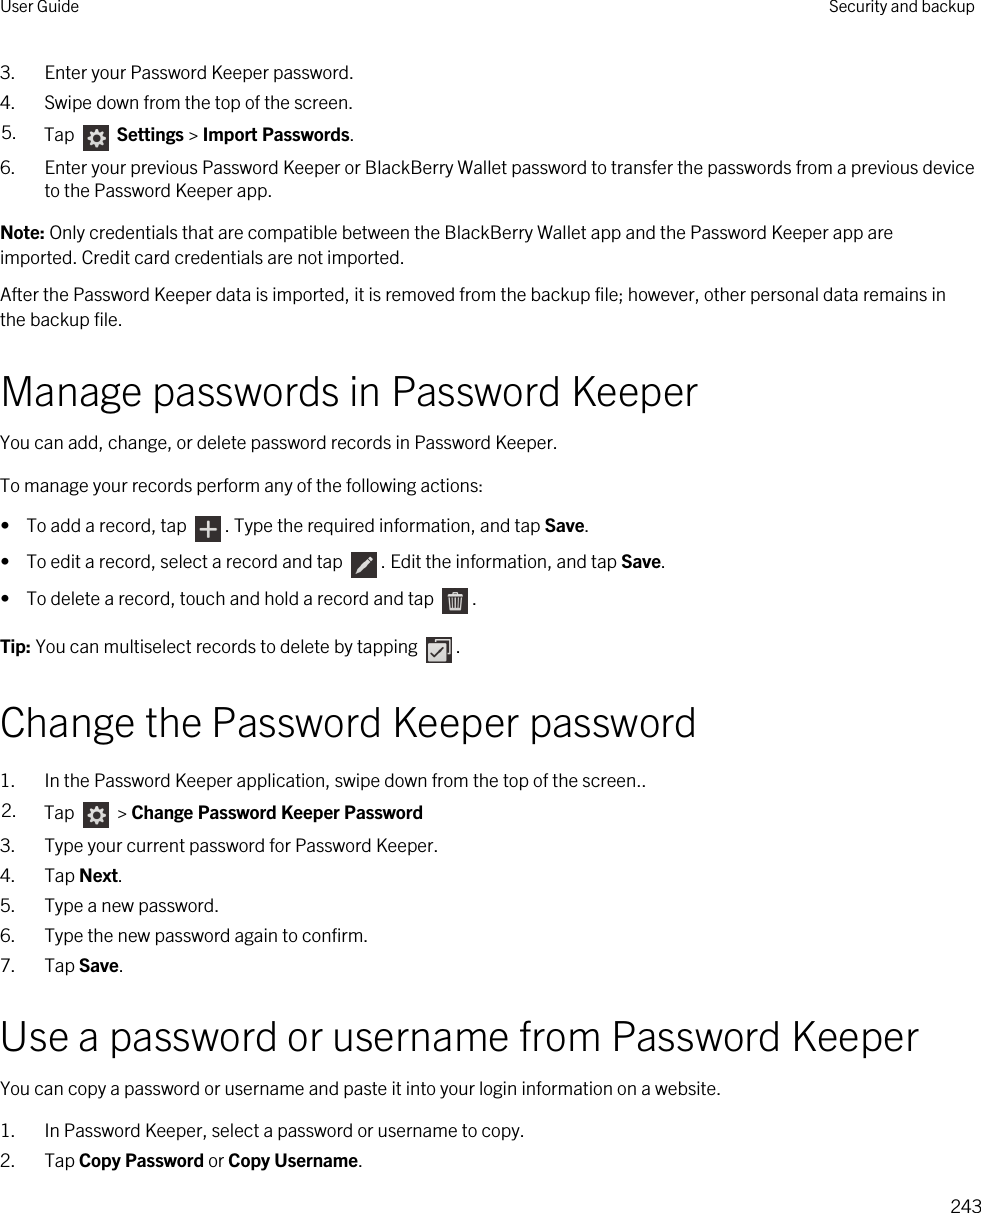 3. Enter your Password Keeper password.4. Swipe down from the top of the screen.5. Tap   Settings &gt; Import Passwords.6. Enter your previous Password Keeper or BlackBerry Wallet password to transfer the passwords from a previous device to the Password Keeper app.Note: Only credentials that are compatible between the BlackBerry Wallet app and the Password Keeper app are imported. Credit card credentials are not imported.After the Password Keeper data is imported, it is removed from the backup file; however, other personal data remains in the backup file.Manage passwords in Password KeeperYou can add, change, or delete password records in Password Keeper.To manage your records perform any of the following actions:•  To add a record, tap  . Type the required information, and tap Save.•  To edit a record, select a record and tap  . Edit the information, and tap Save.•  To delete a record, touch and hold a record and tap  .Tip: You can multiselect records to delete by tapping  .Change the Password Keeper password1. In the Password Keeper application, swipe down from the top of the screen..2. Tap   &gt; Change Password Keeper Password3. Type your current password for Password Keeper.4. Tap Next.5. Type a new password.6. Type the new password again to confirm.7. Tap Save.Use a password or username from Password KeeperYou can copy a password or username and paste it into your login information on a website.1. In Password Keeper, select a password or username to copy.2. Tap Copy Password or Copy Username.User Guide Security and backup243